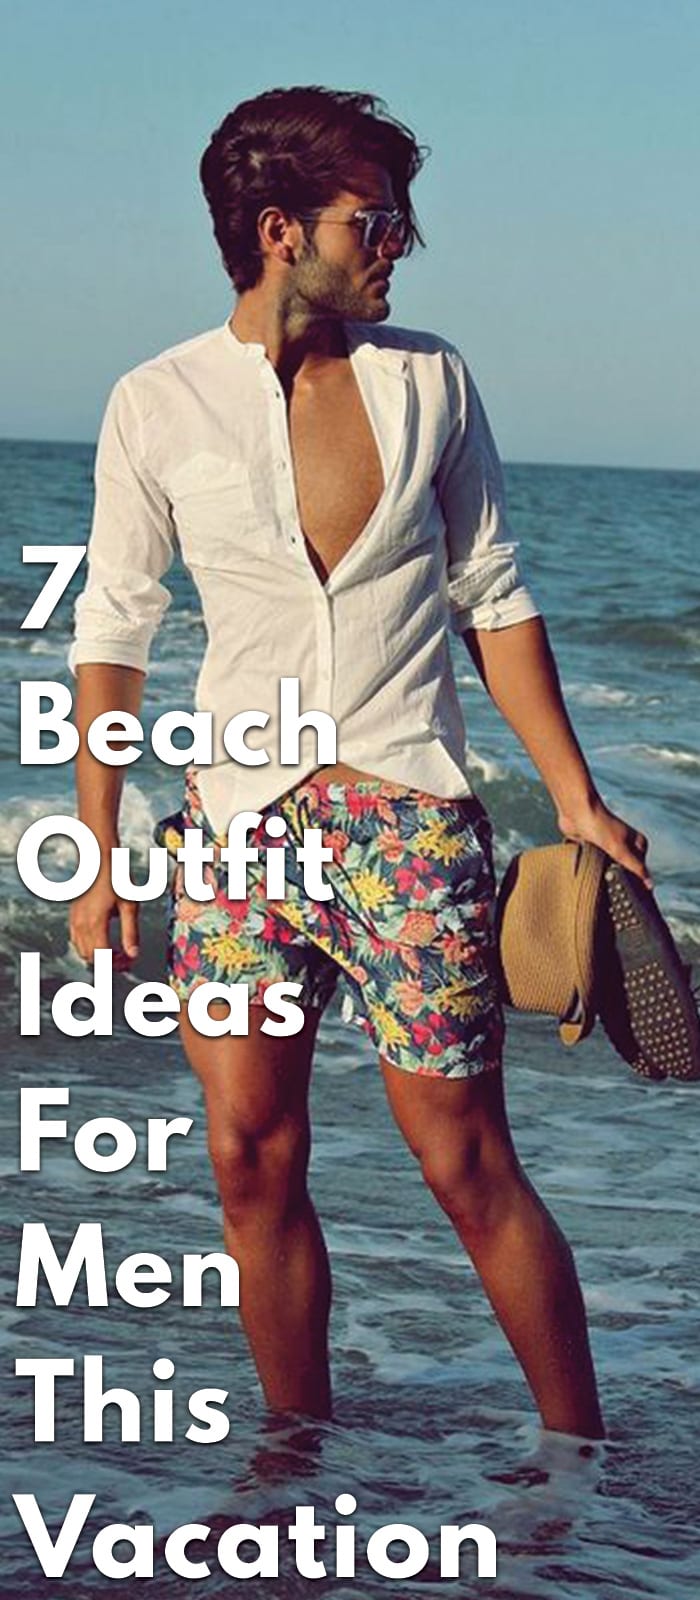 7-Beach-Outfit-Ideas-For-Men-This-Vacation